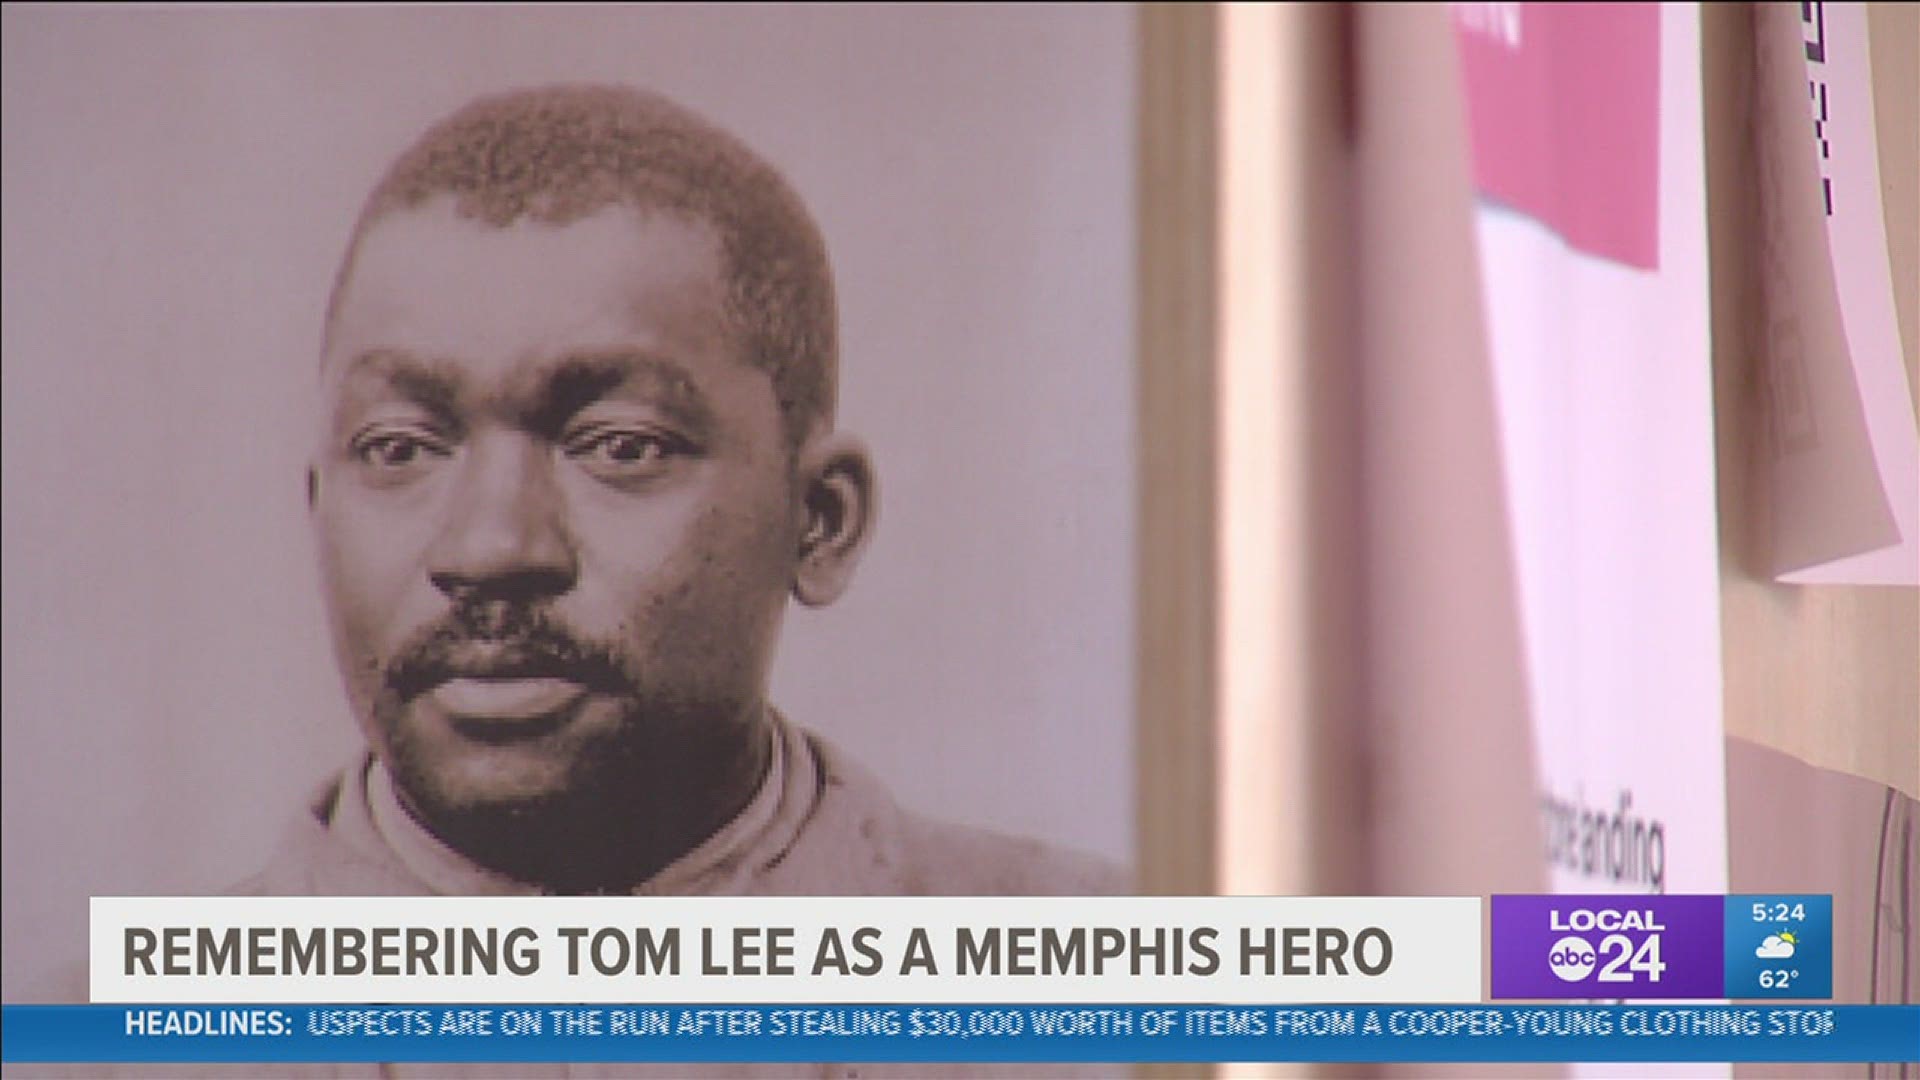 Local 24 News political analyst and commentator Otis Sanford shares his point of view on Tom Lee Day, which was this past weekend.